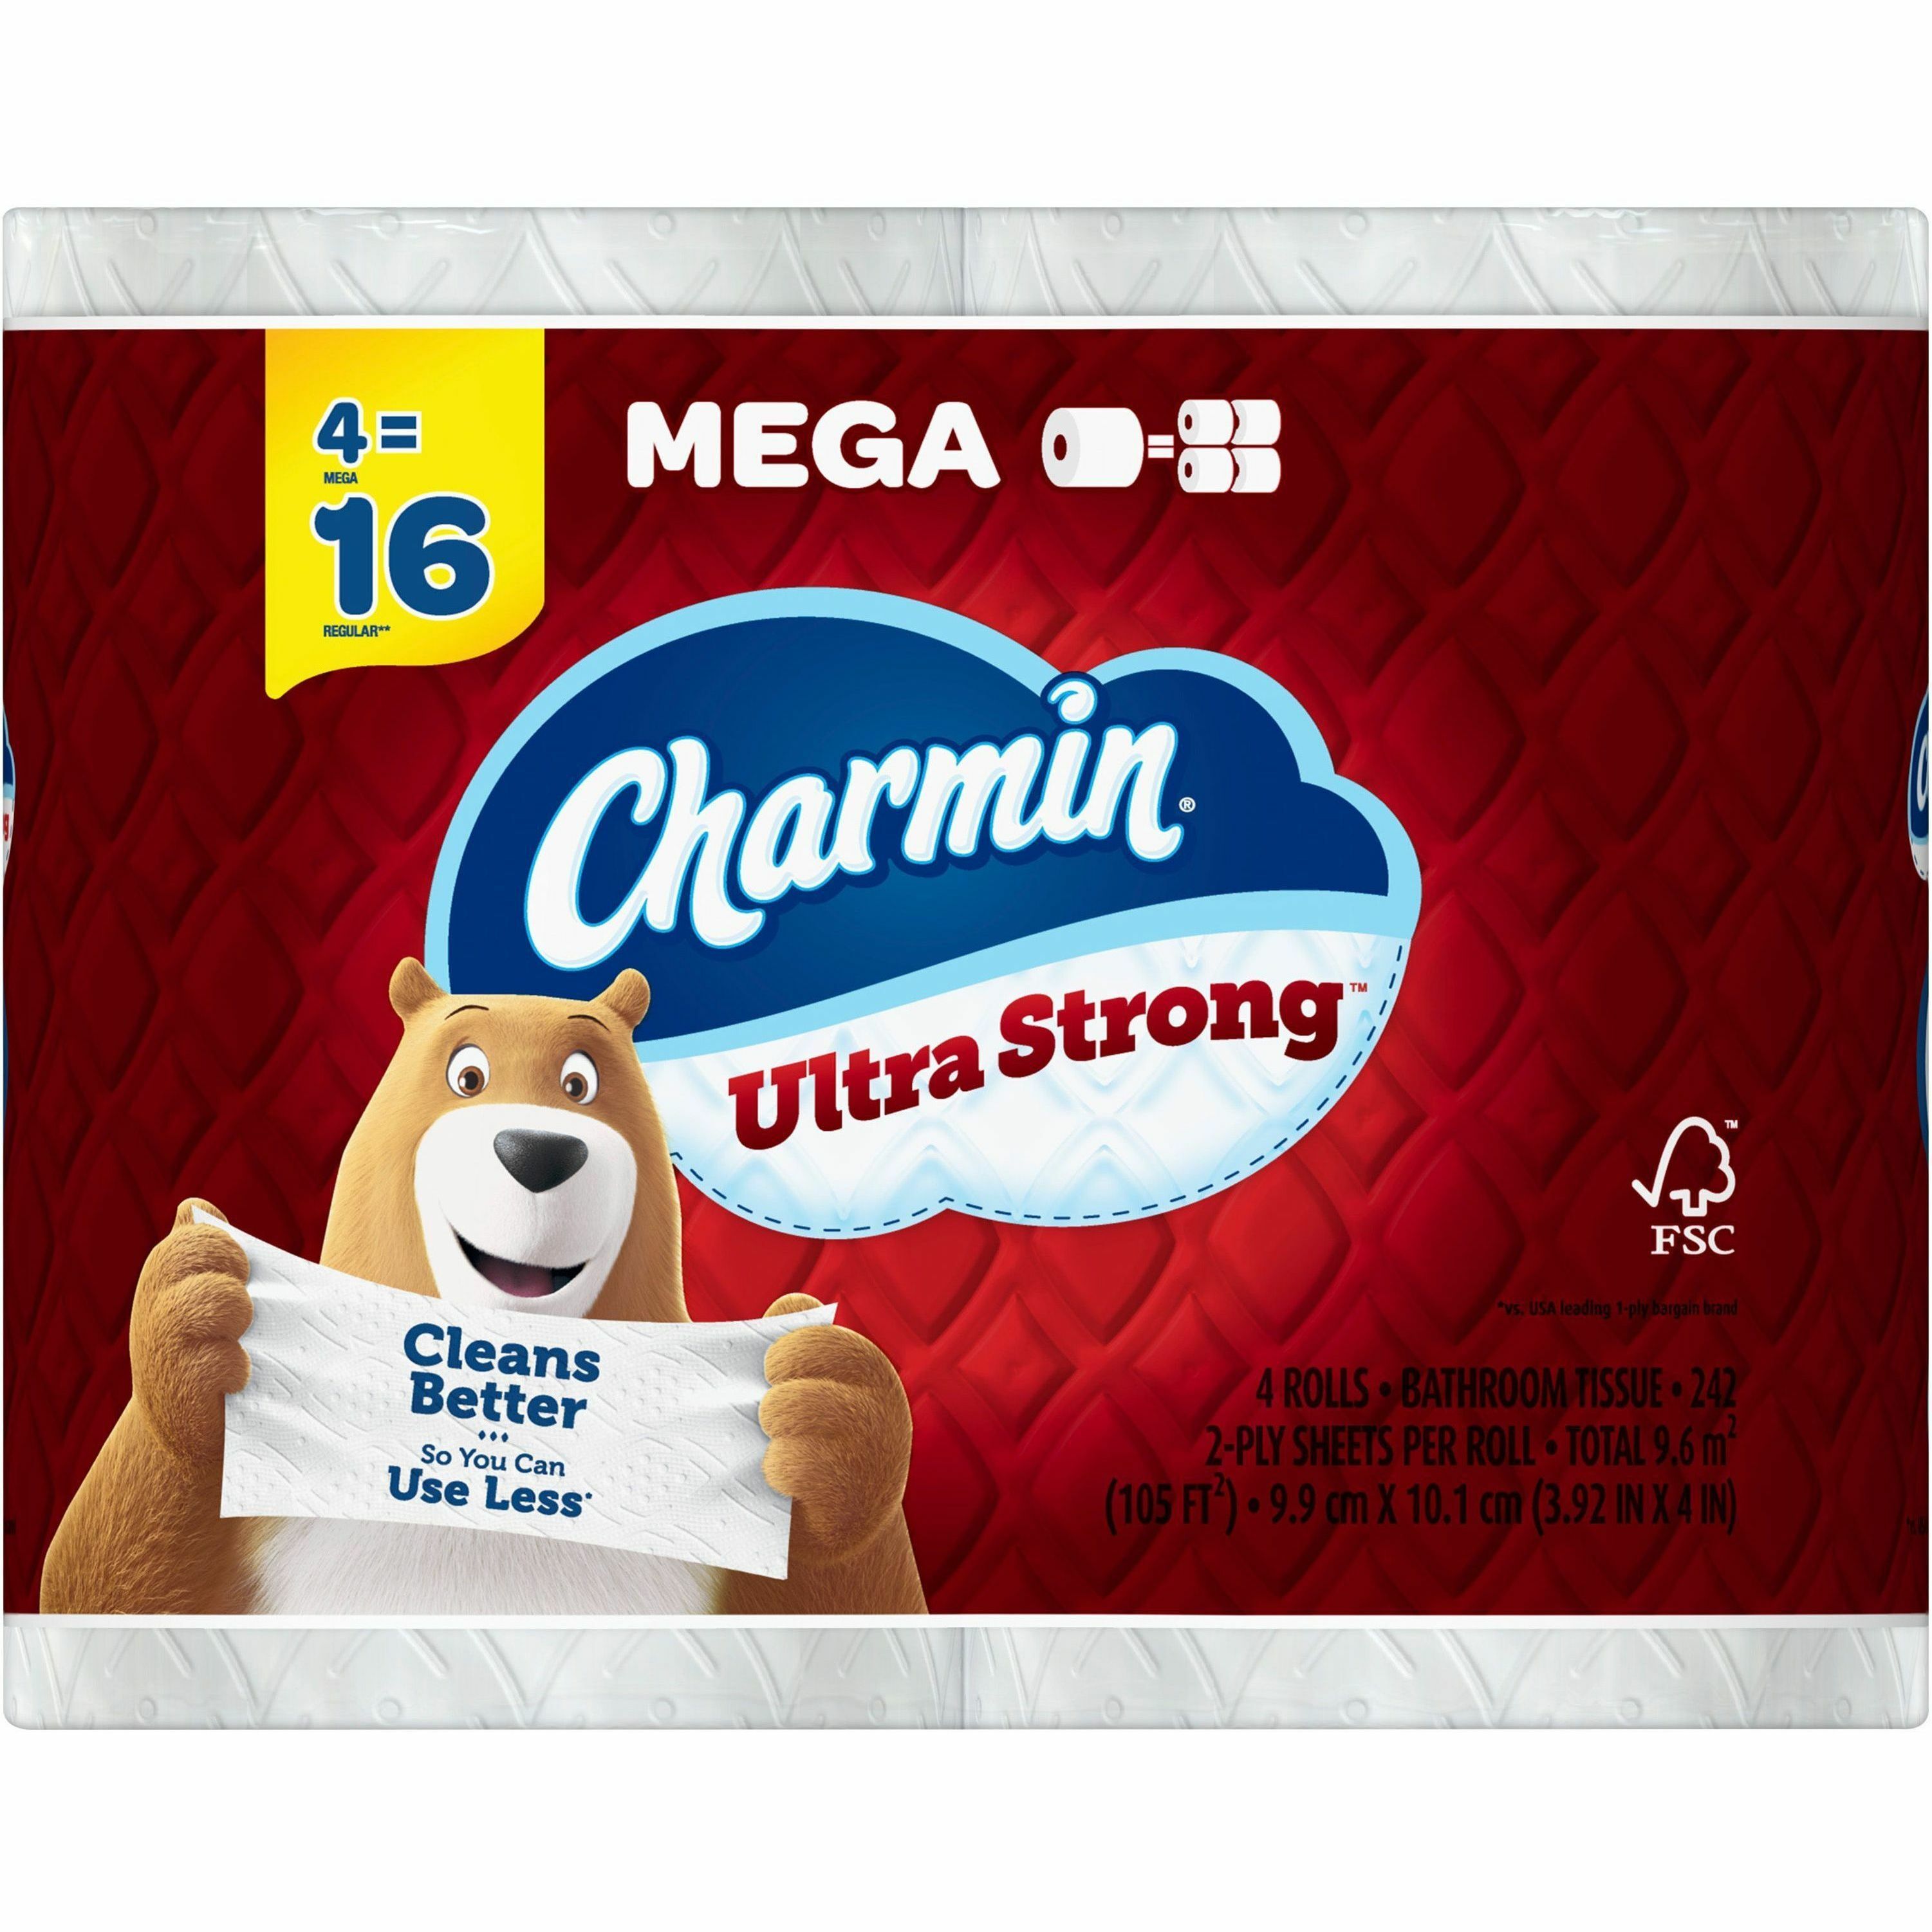 Charmin Ultra Strong Bath Tissue - 2 Ply - White - Strong, Textured, Long Lasting, Clog Safe, Septic Safe - For Bathroom, Toilet - 8 / Carton